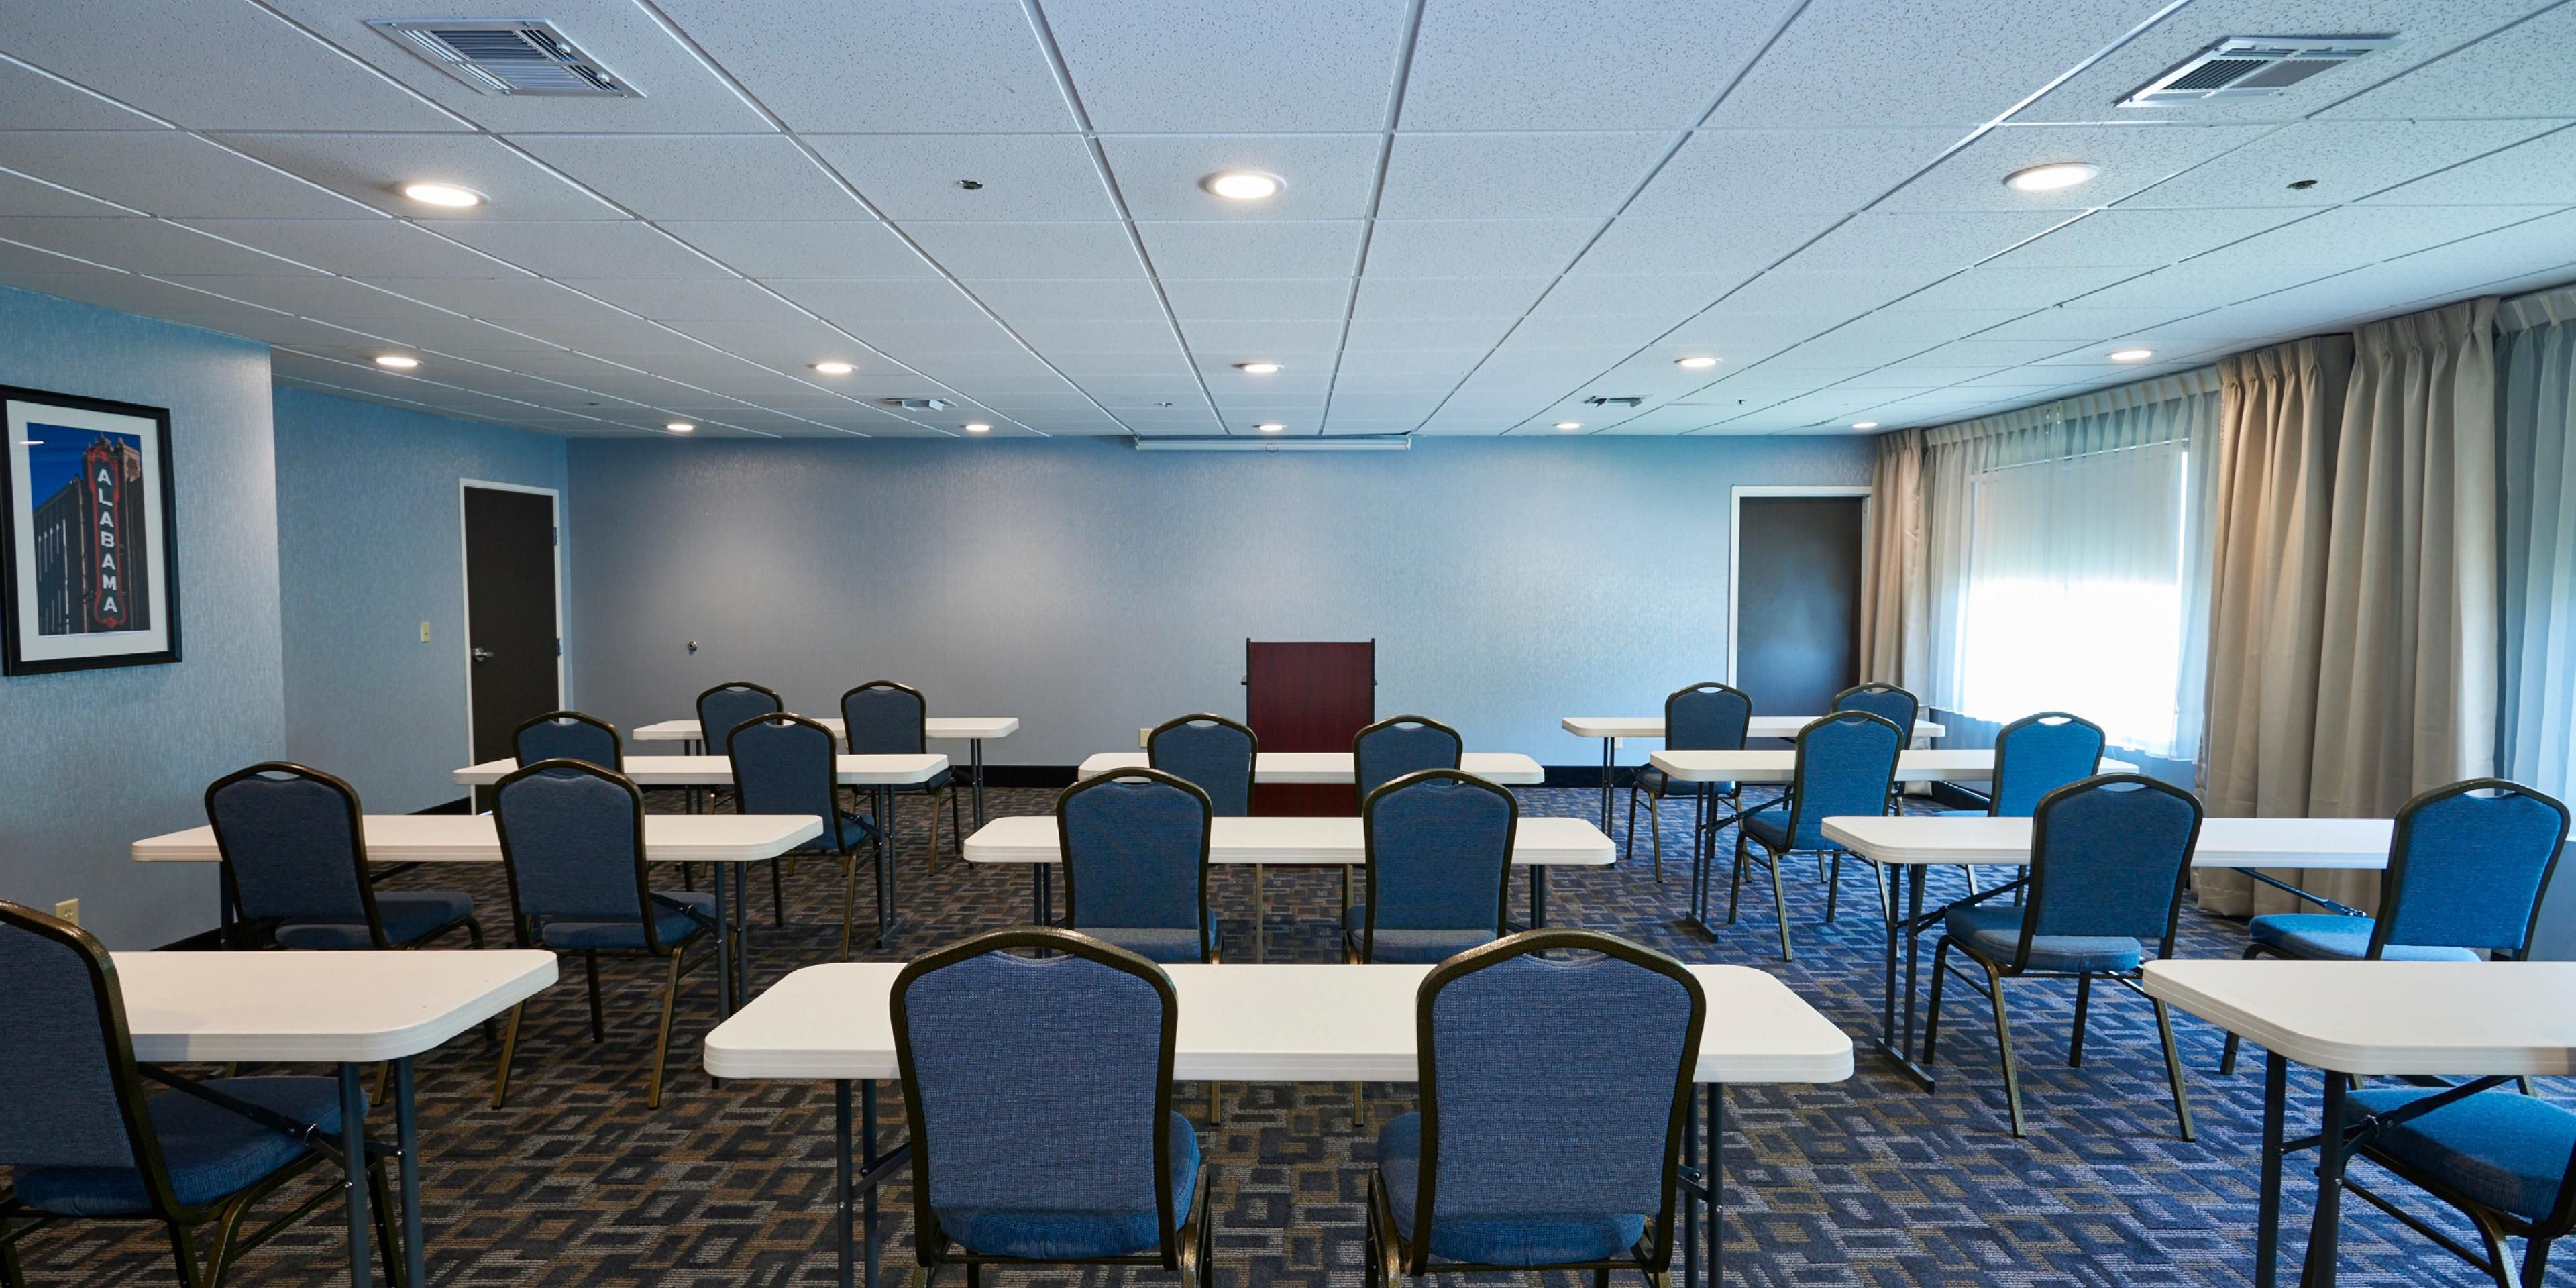 Looking for Meeting Space in Pelham, AL? Give us a call!  We can accommodate up to 75 people Theater Style, 45 people Classroom Style and 56 people Banquet Style.  Call our hotel directly to find out more and book our great space.
